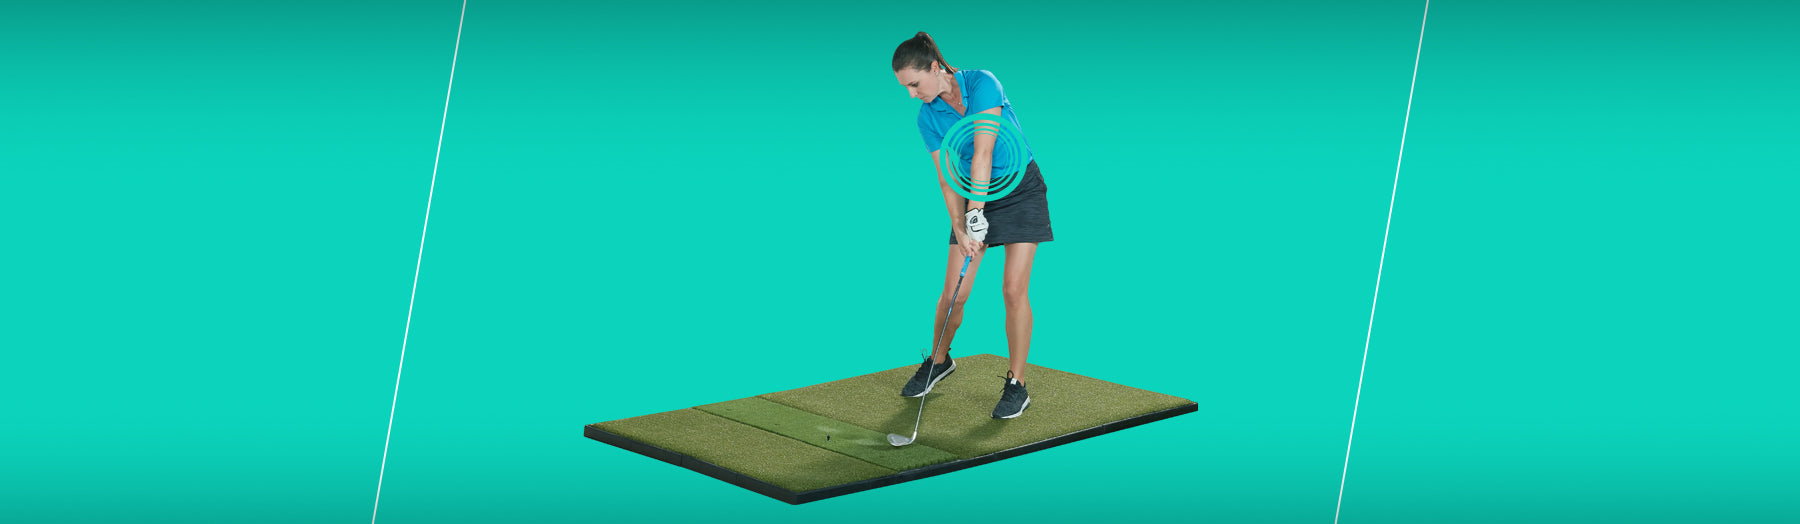 How Do You Stop Hurting Your Joints When You Practice Golf? Time to Hit on Fiberbuilt Grass Series Mats.